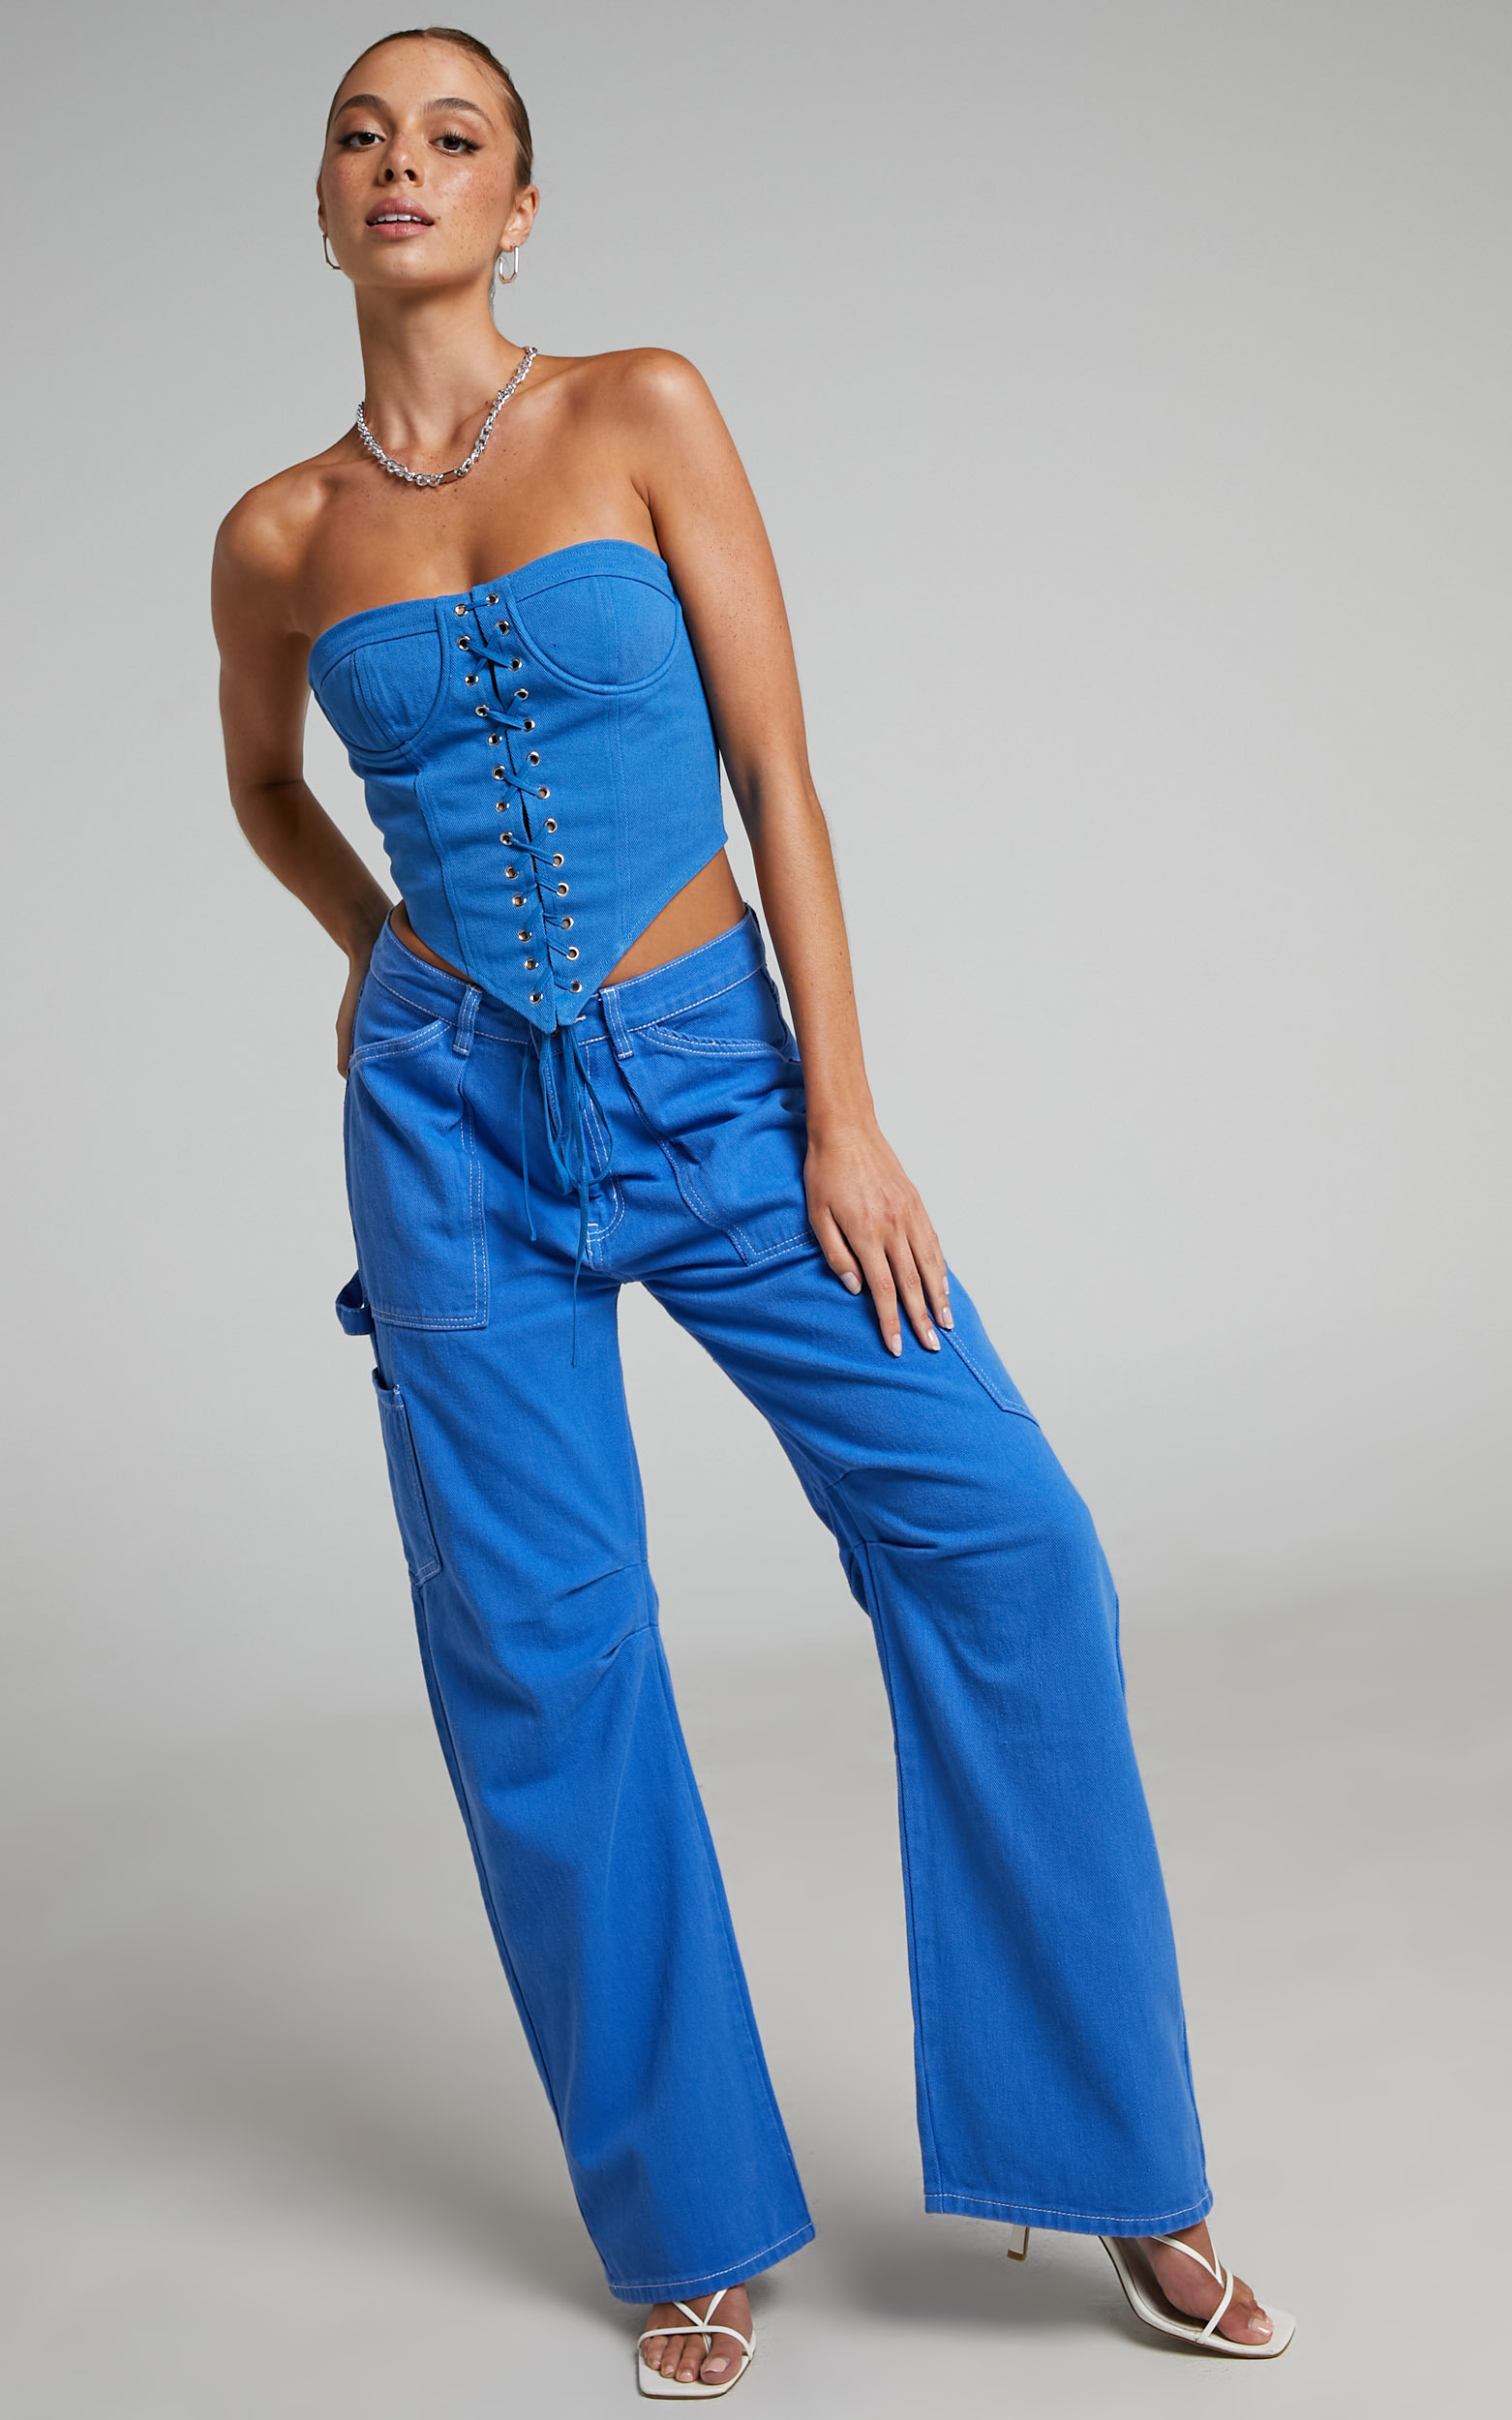 Lioness - Miami Vice Pants in Blue - L, BLU1, hi-res image number null